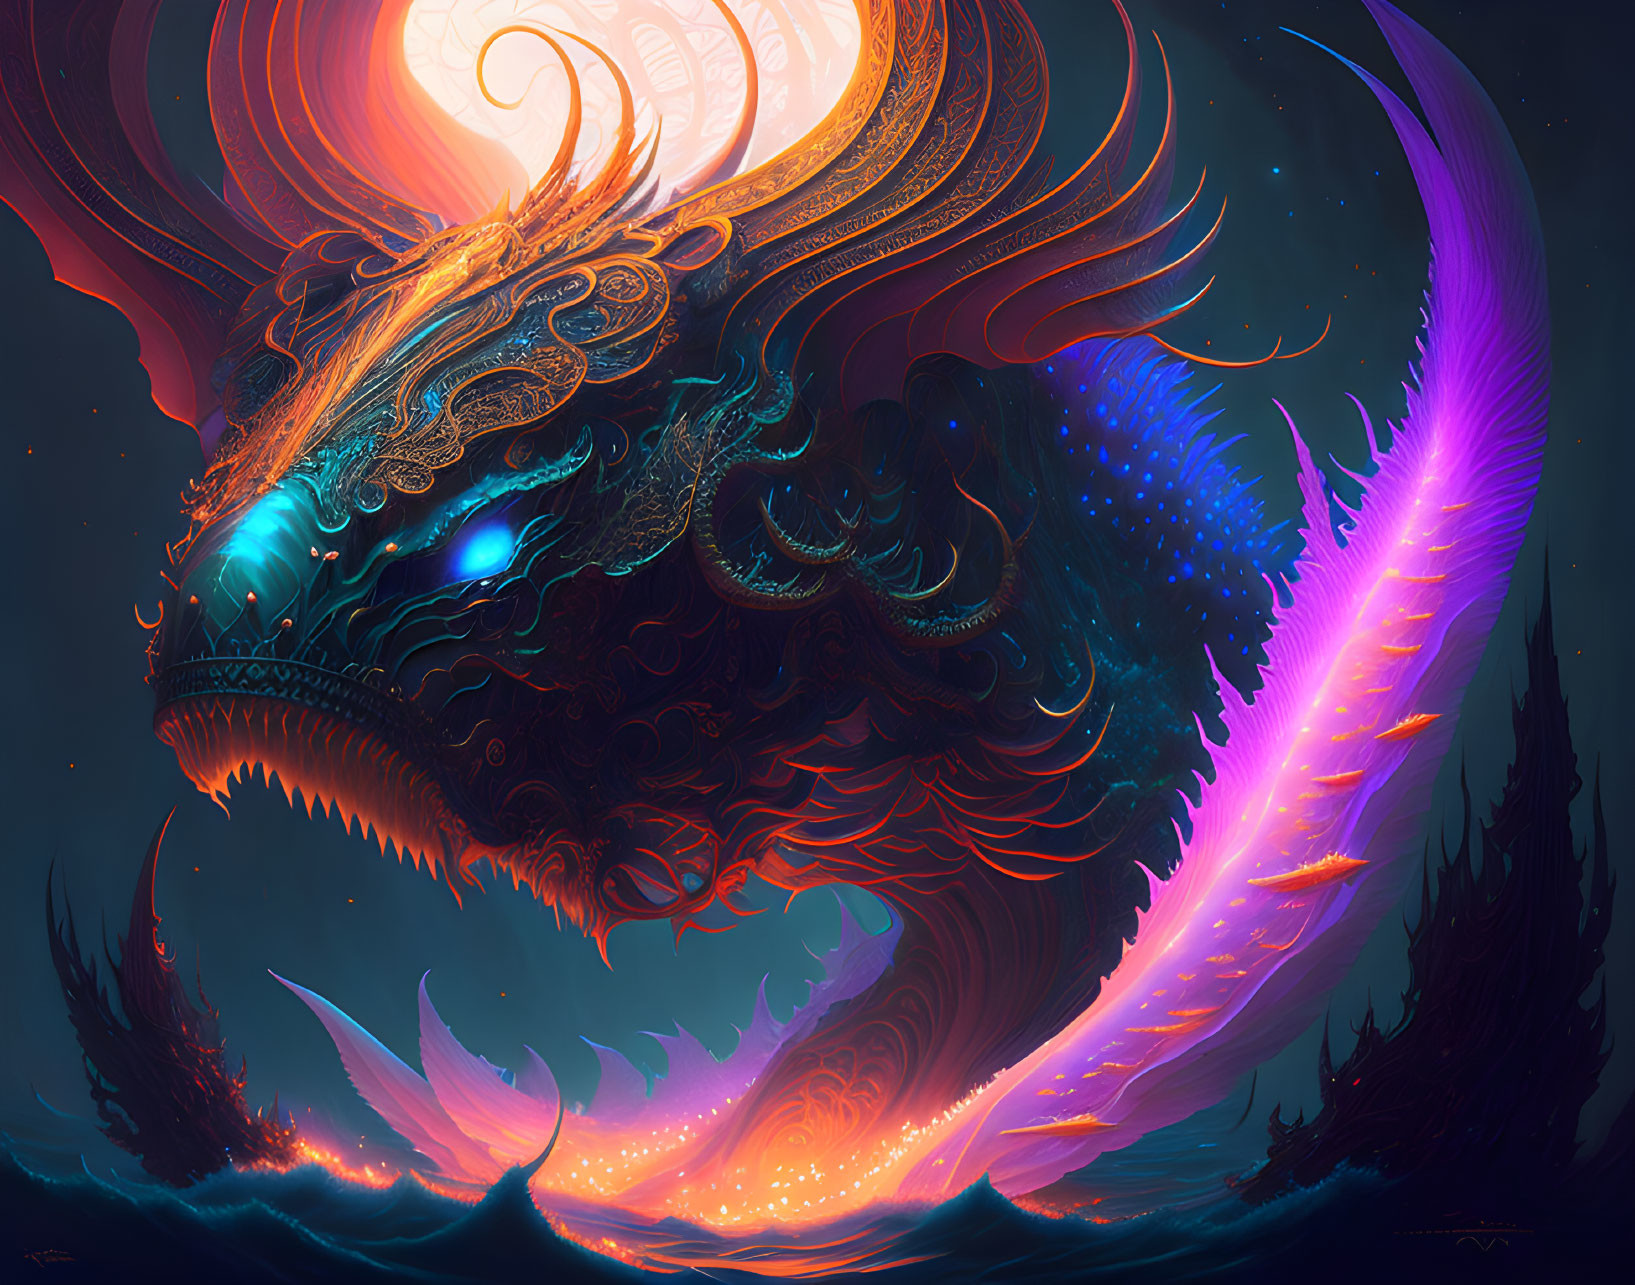 Mythical dragon with luminescent scales in moonlit sky